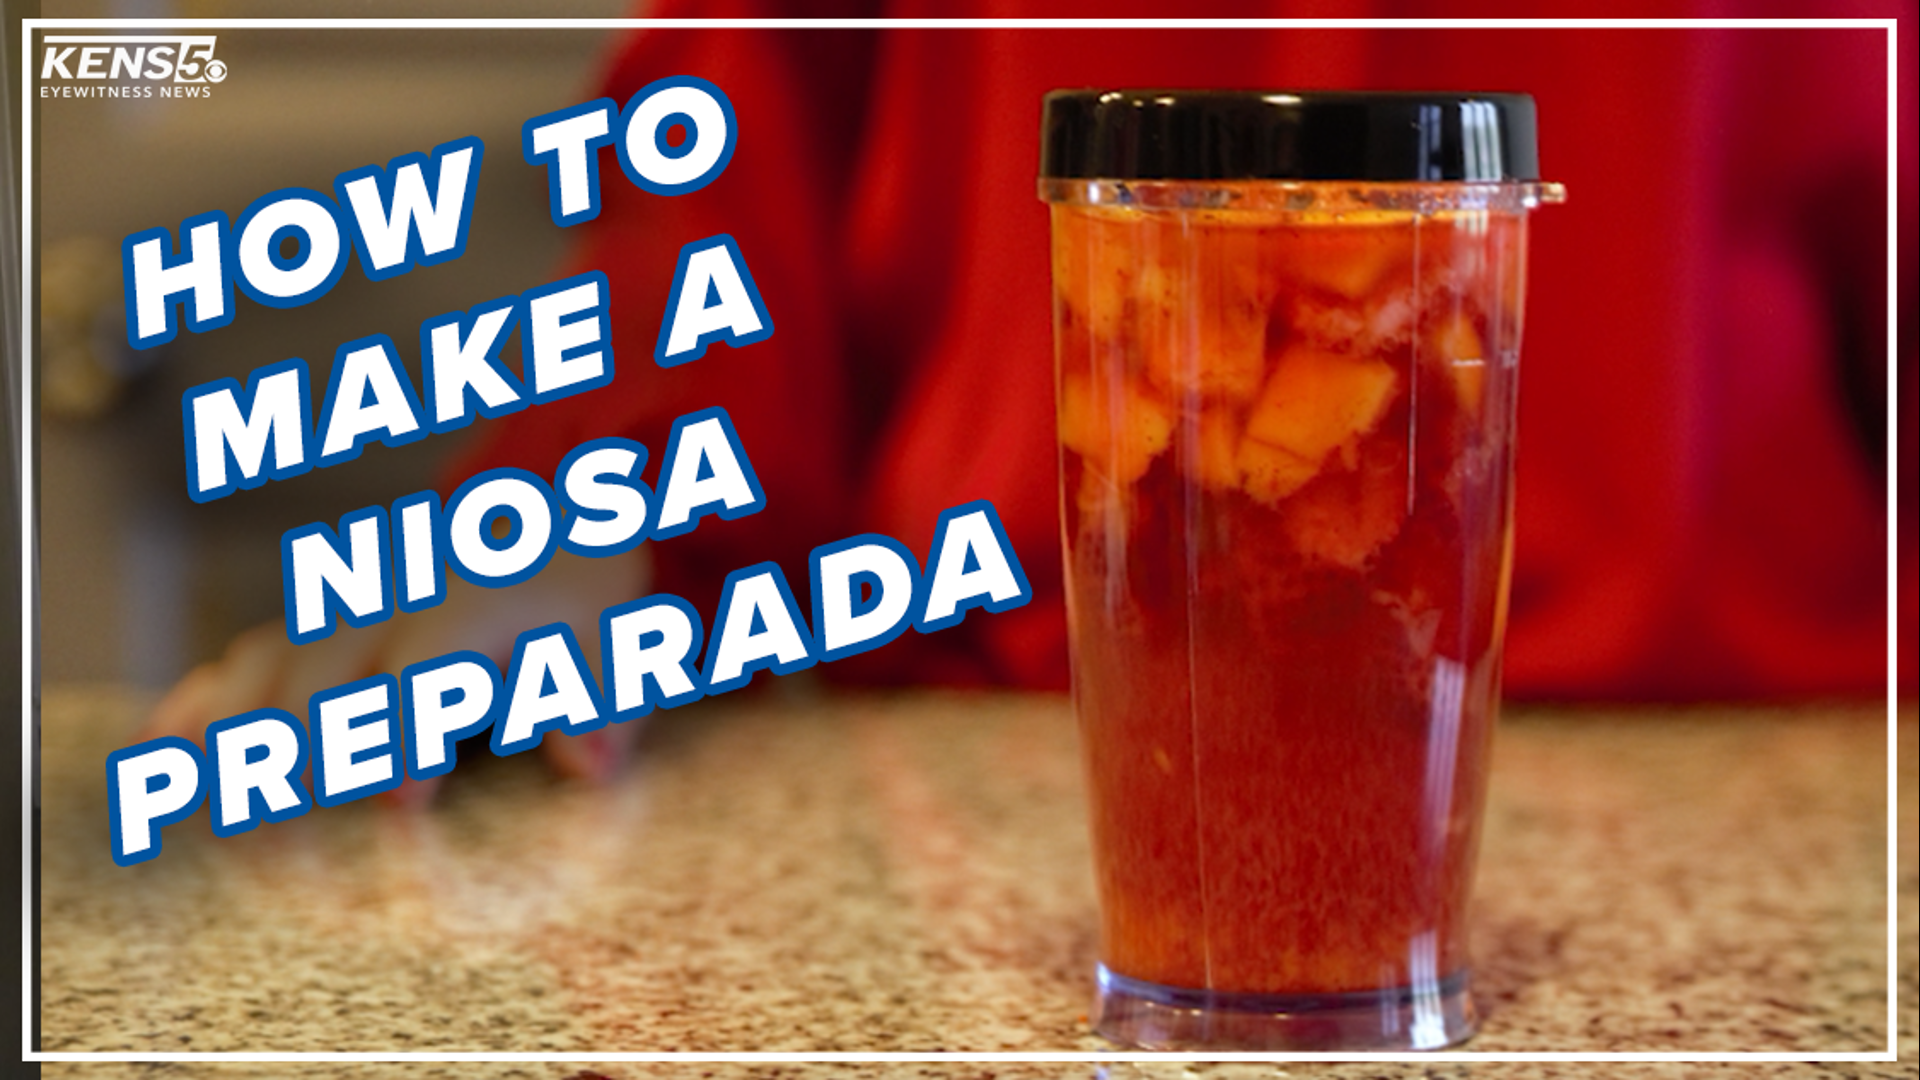 Just because Fiesta didn't happen in April doesn't mean you can't make your own NIOSA Preparada at home. Digital journalist Lexi Hazlett makes the mocktail version.